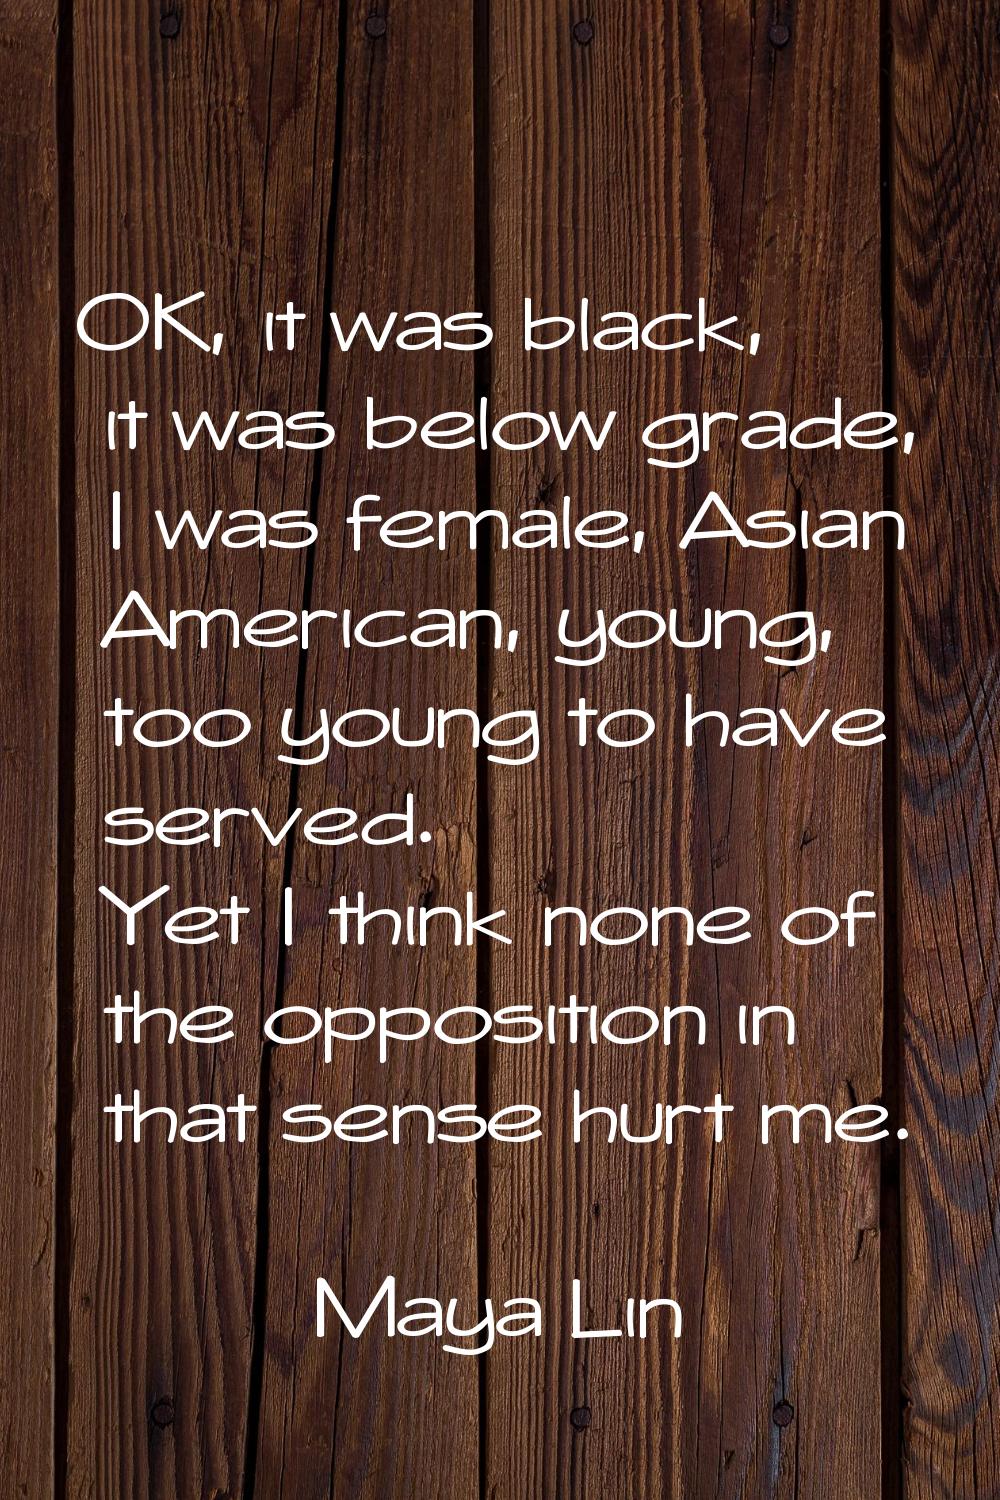 OK, it was black, it was below grade, I was female, Asian American, young, too young to have served